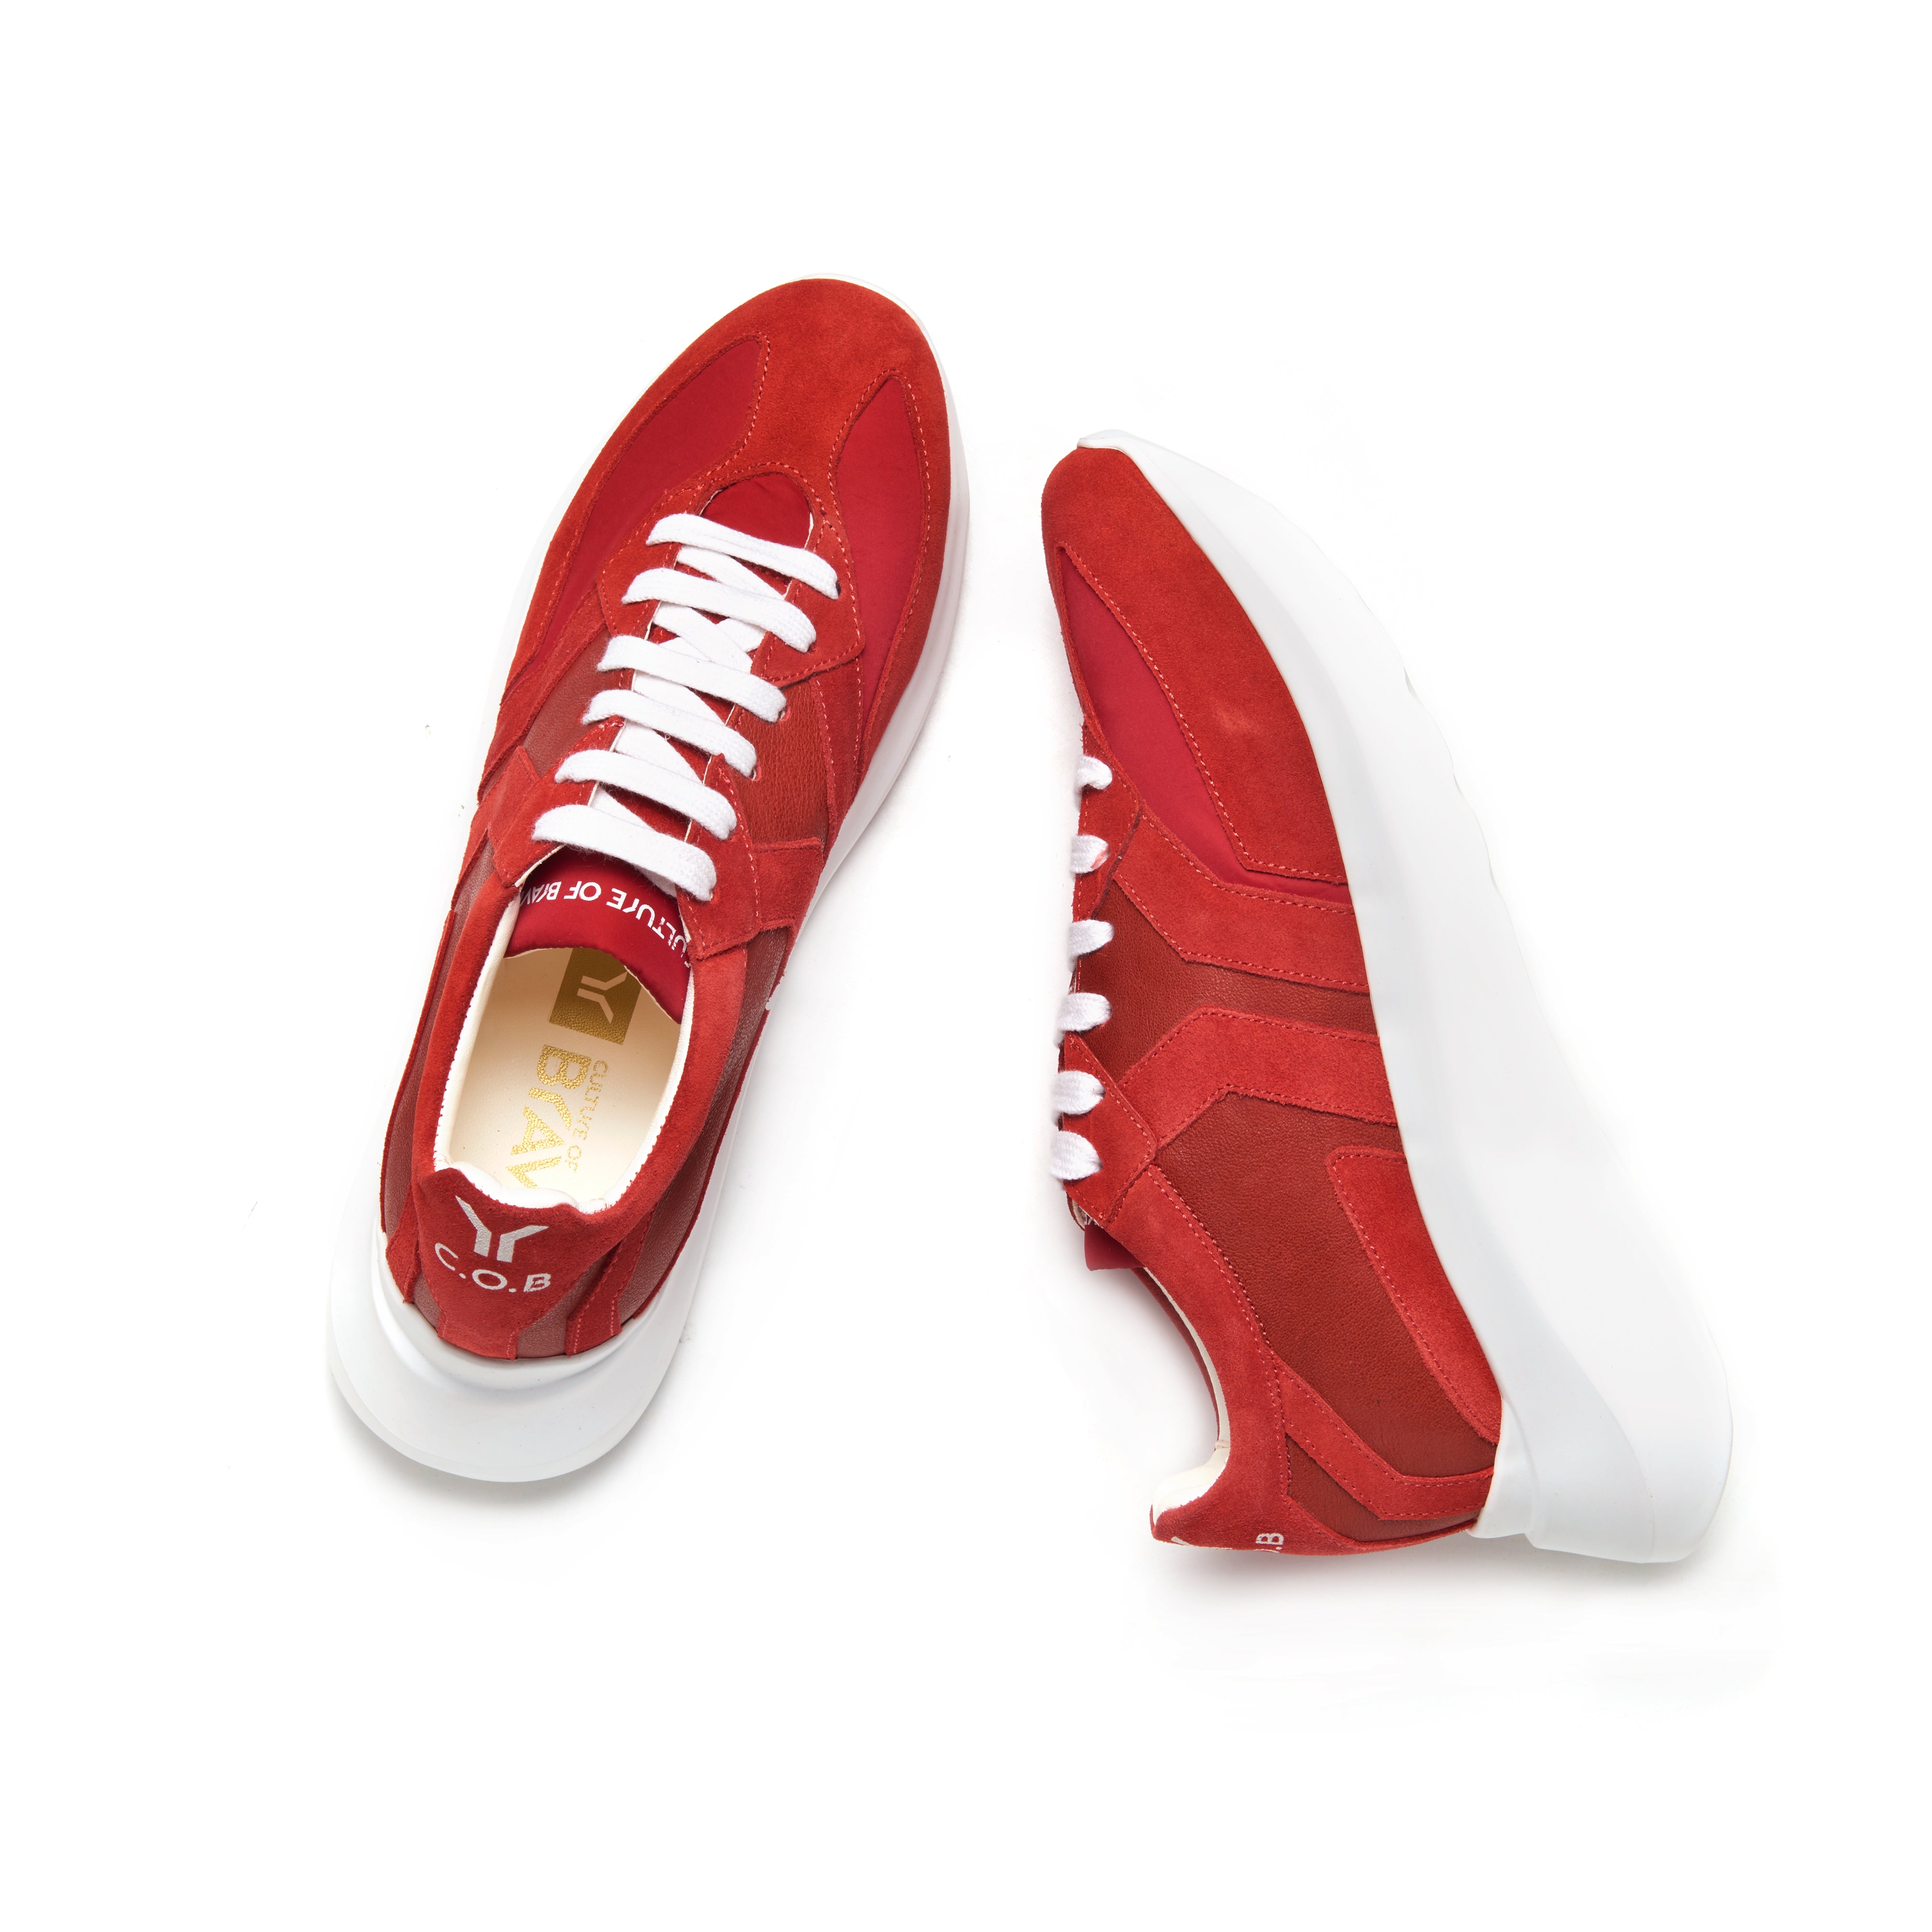 Free Soul_6 Women Red leather red wing low cut